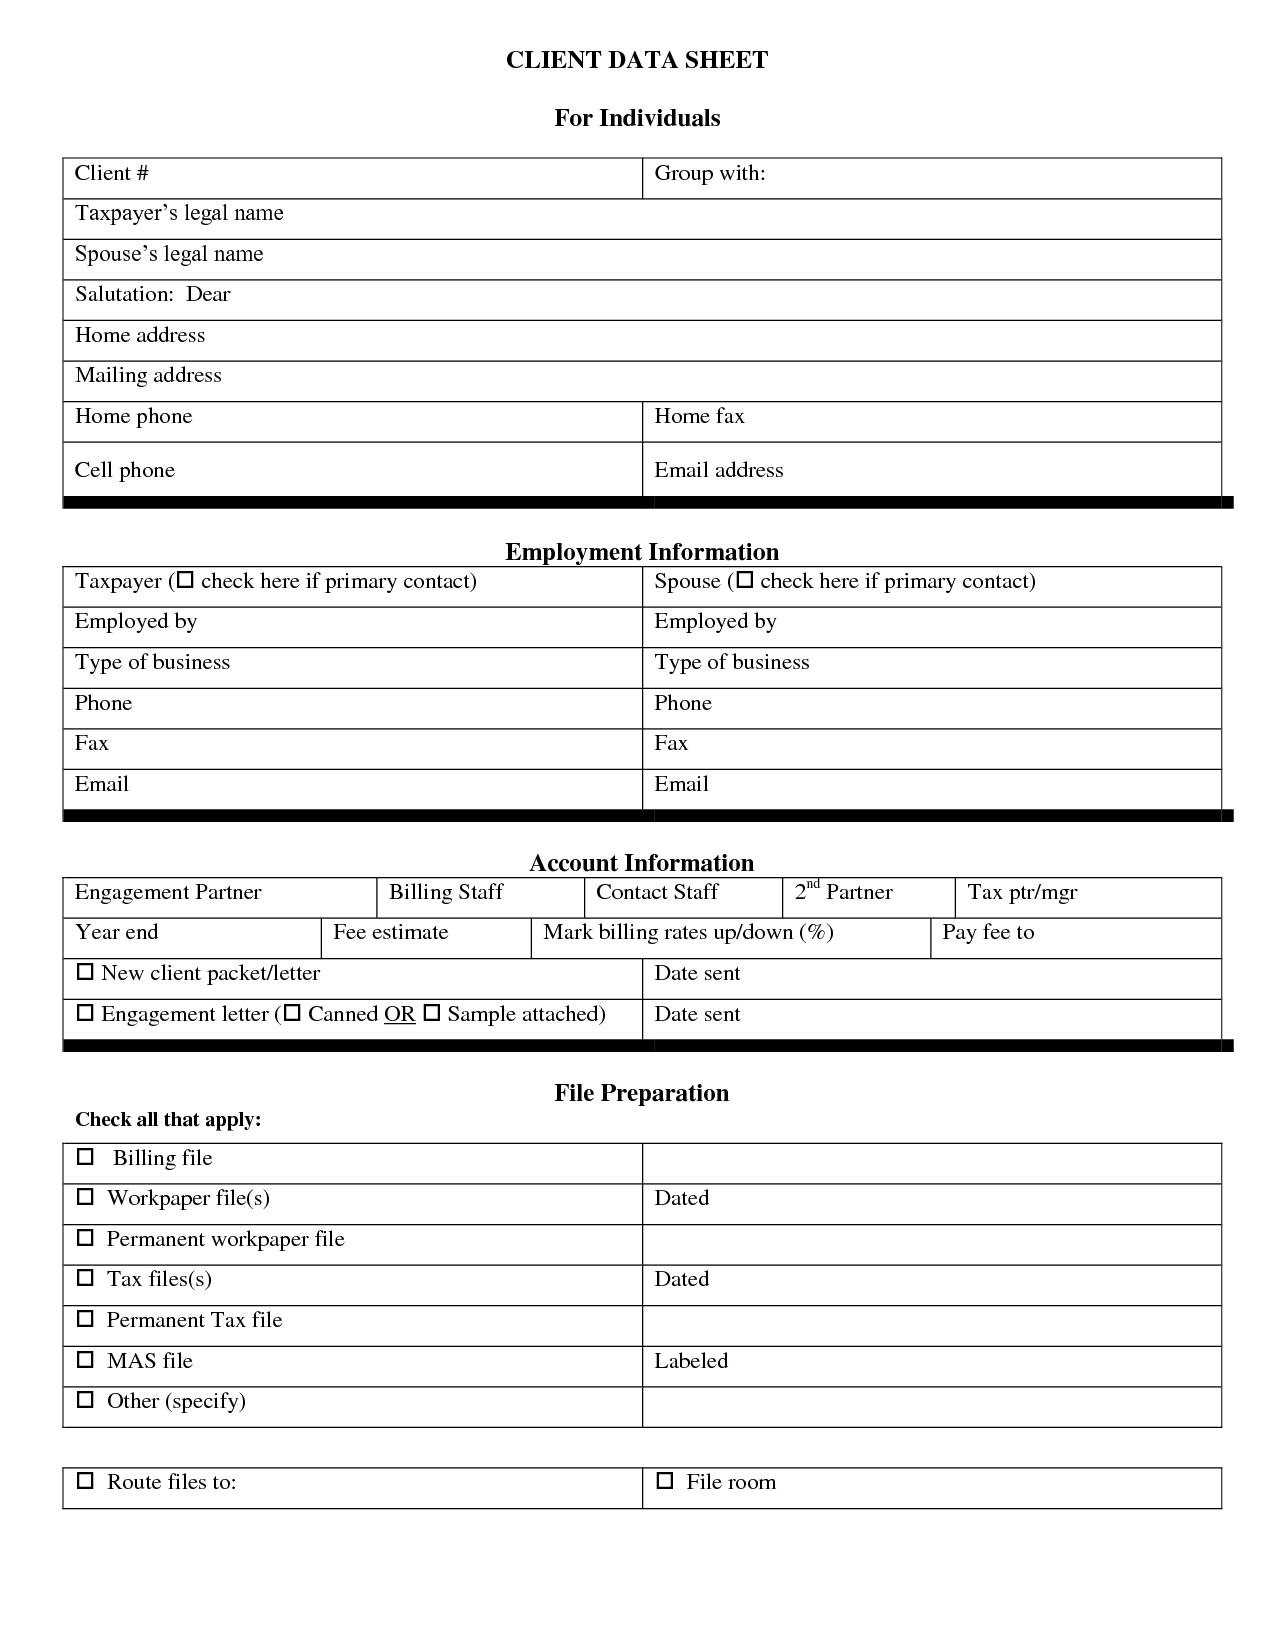 Free Personal Information Forms | Client Data Sheet For Individuals - Free Printable Customer Information Sheets